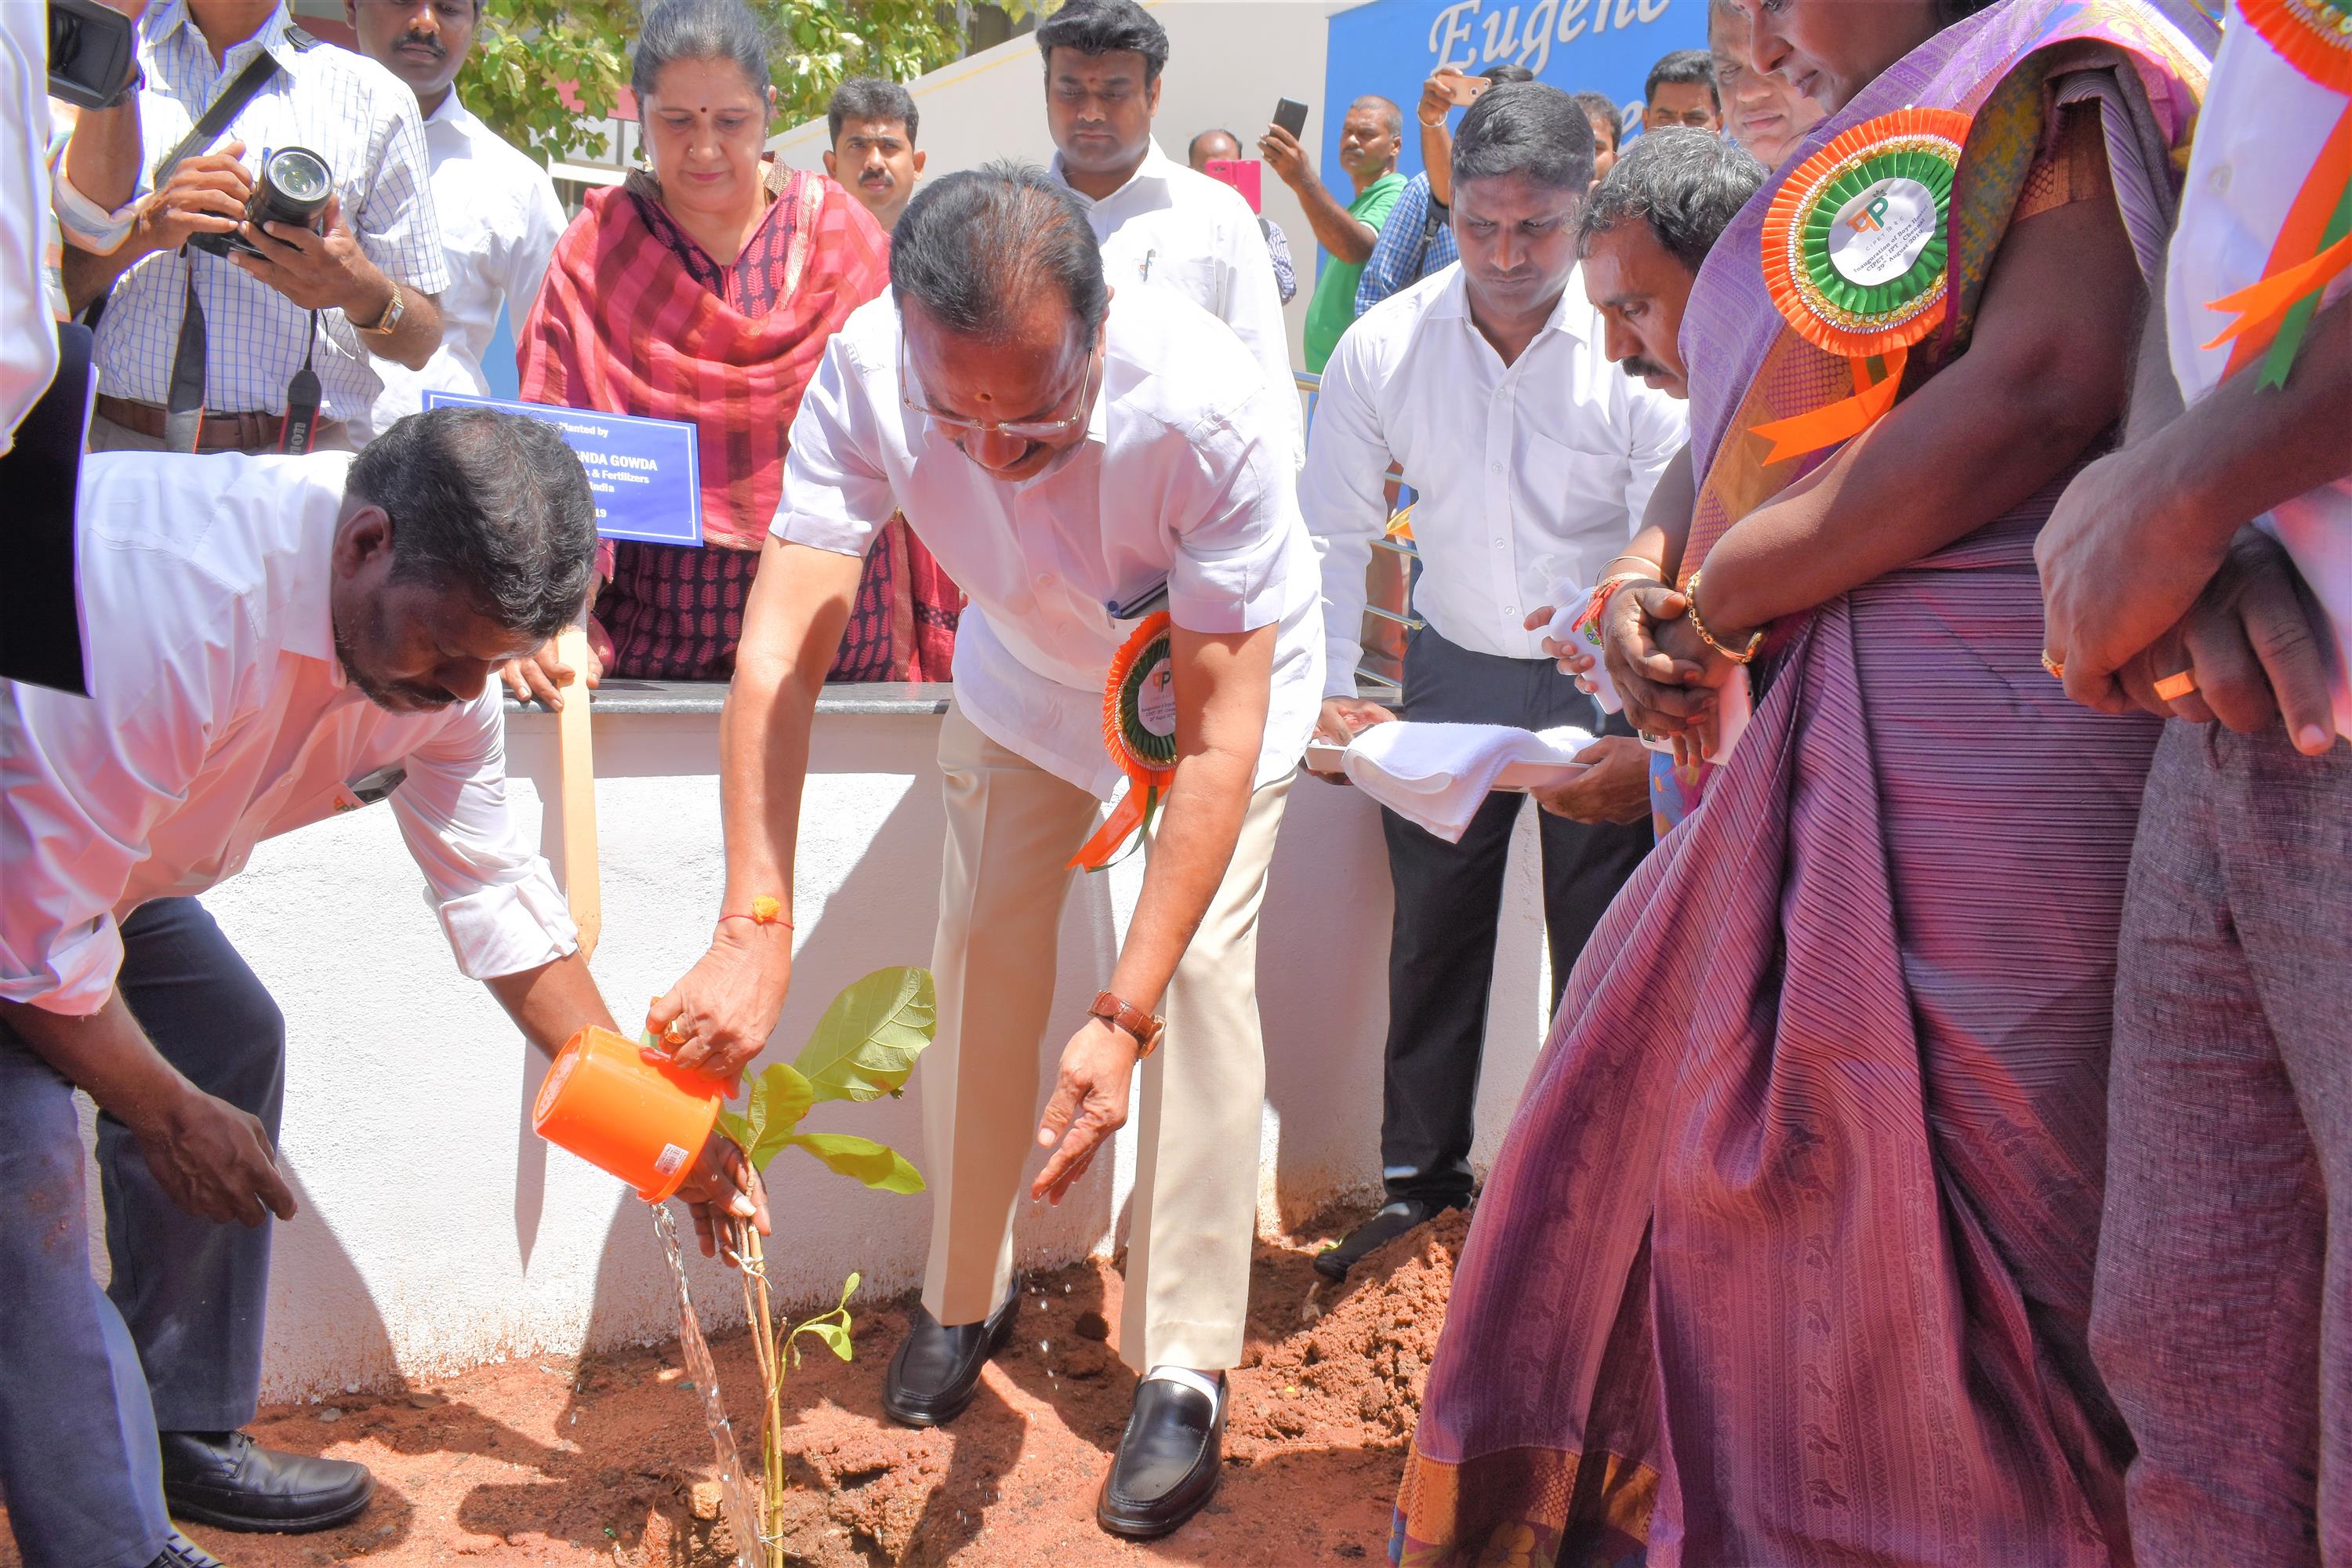 Shri. D. V. Sadananda Gowda, Union Minister for Chemicals & Fertilizers planting a tree sapling  during the inauguration of the Boys Hostel of the CIPET: Institute of Plastics Technology, Deptt. Of Chemicals & Petrochemicals, Ministry of Chemicals & Fertilizers at Chennai, today (August 29, 2019)  